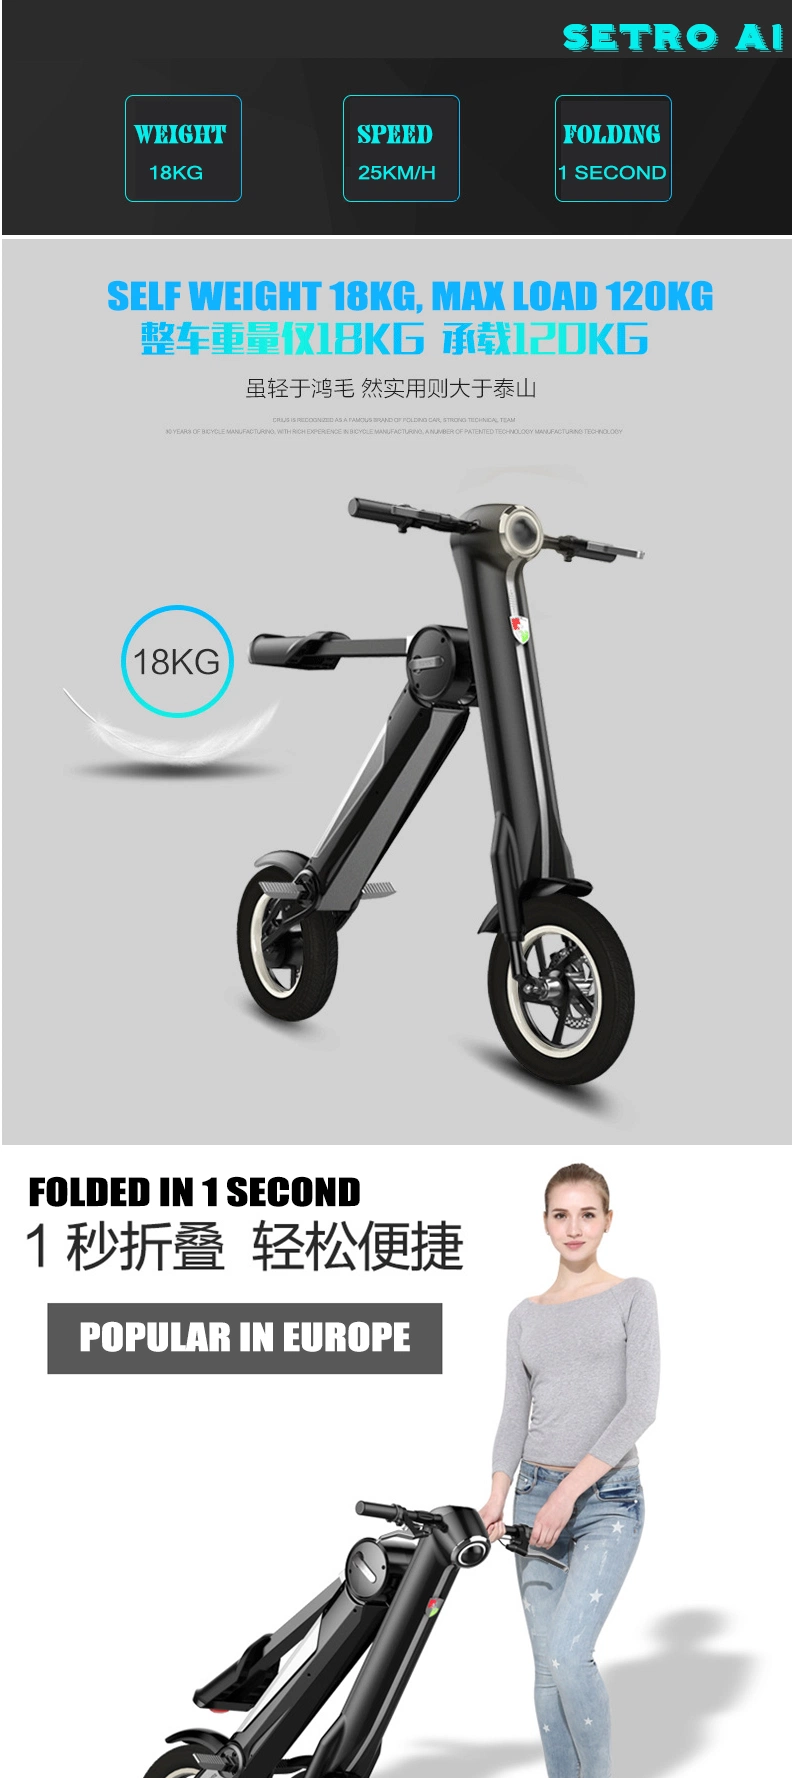 Moto Electrica Plegable Hover K1 K2 E-Bike Electric Scooter and Bicycle